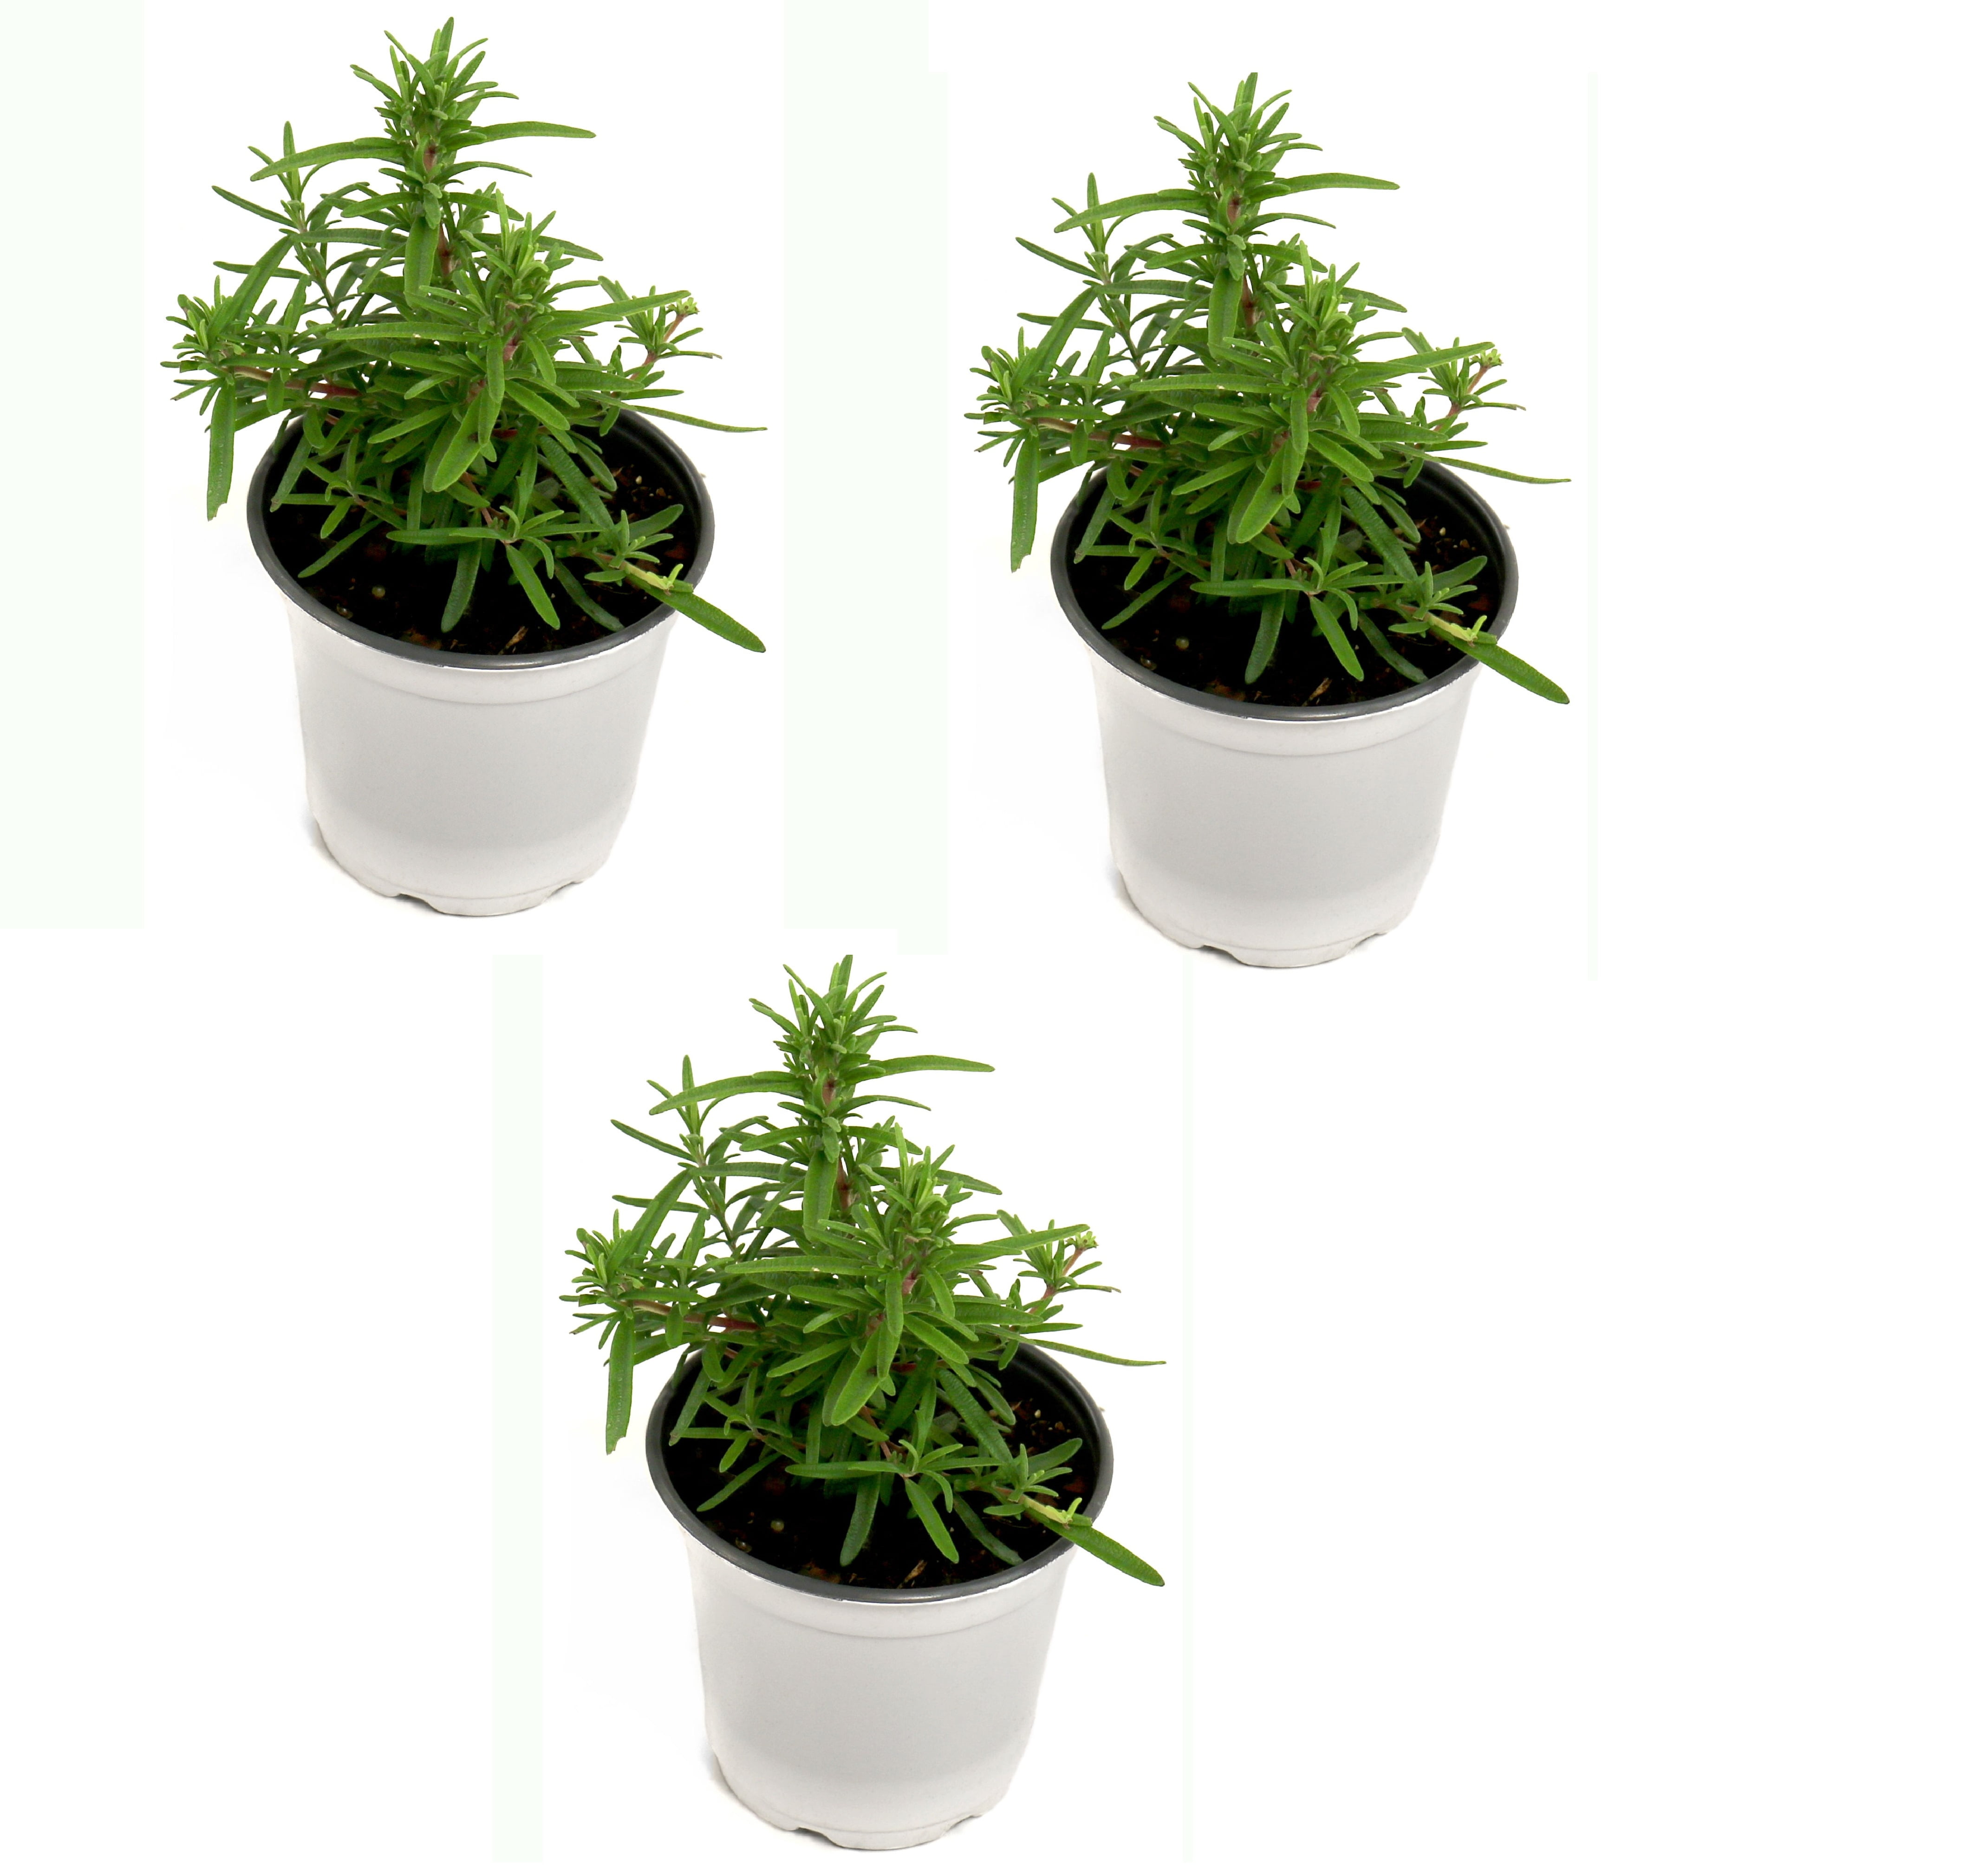 4" Rosemary Herb Plant with Lavender Blooms 3 Pack